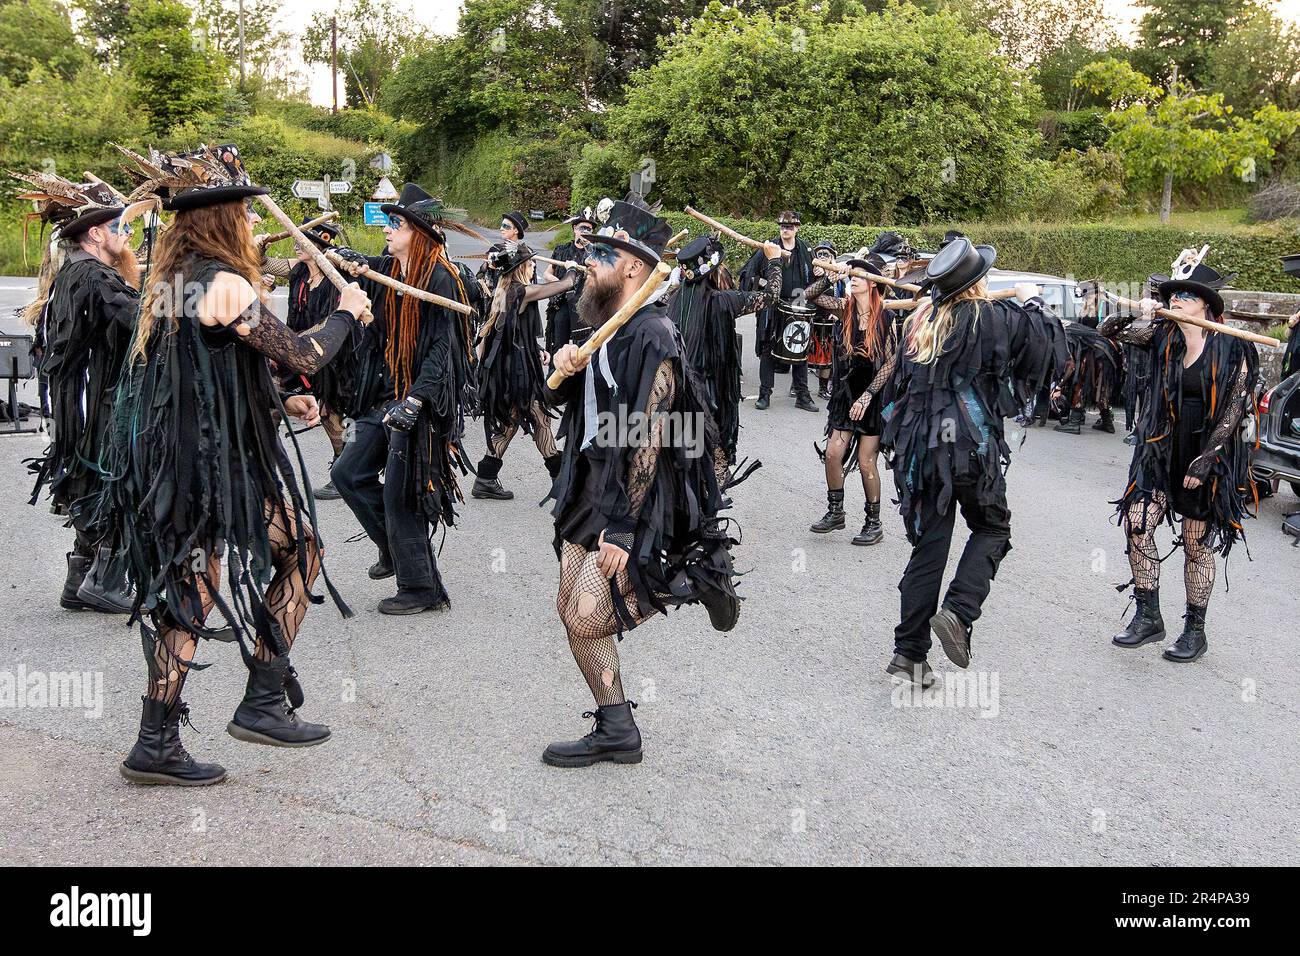 The Beltane Border Morris pictured during an evening performance on the edge of Dartmoor, Devon, UK. Stock Photo